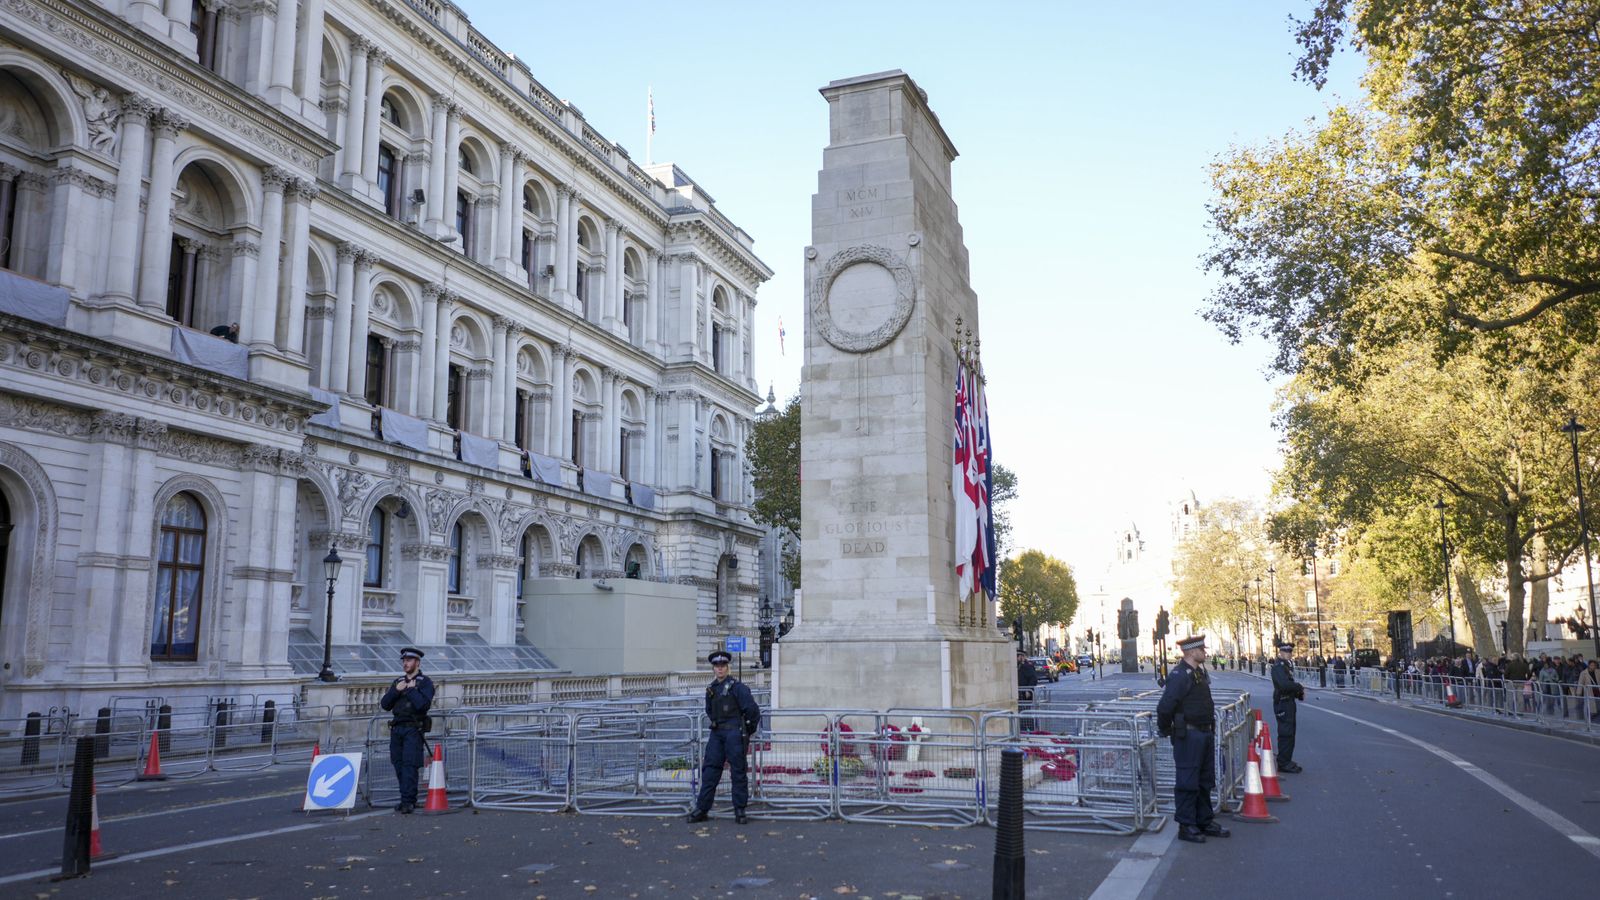 King to lead Remembrance Day service at Cenotaph hours after protests resulted over 100 arrests